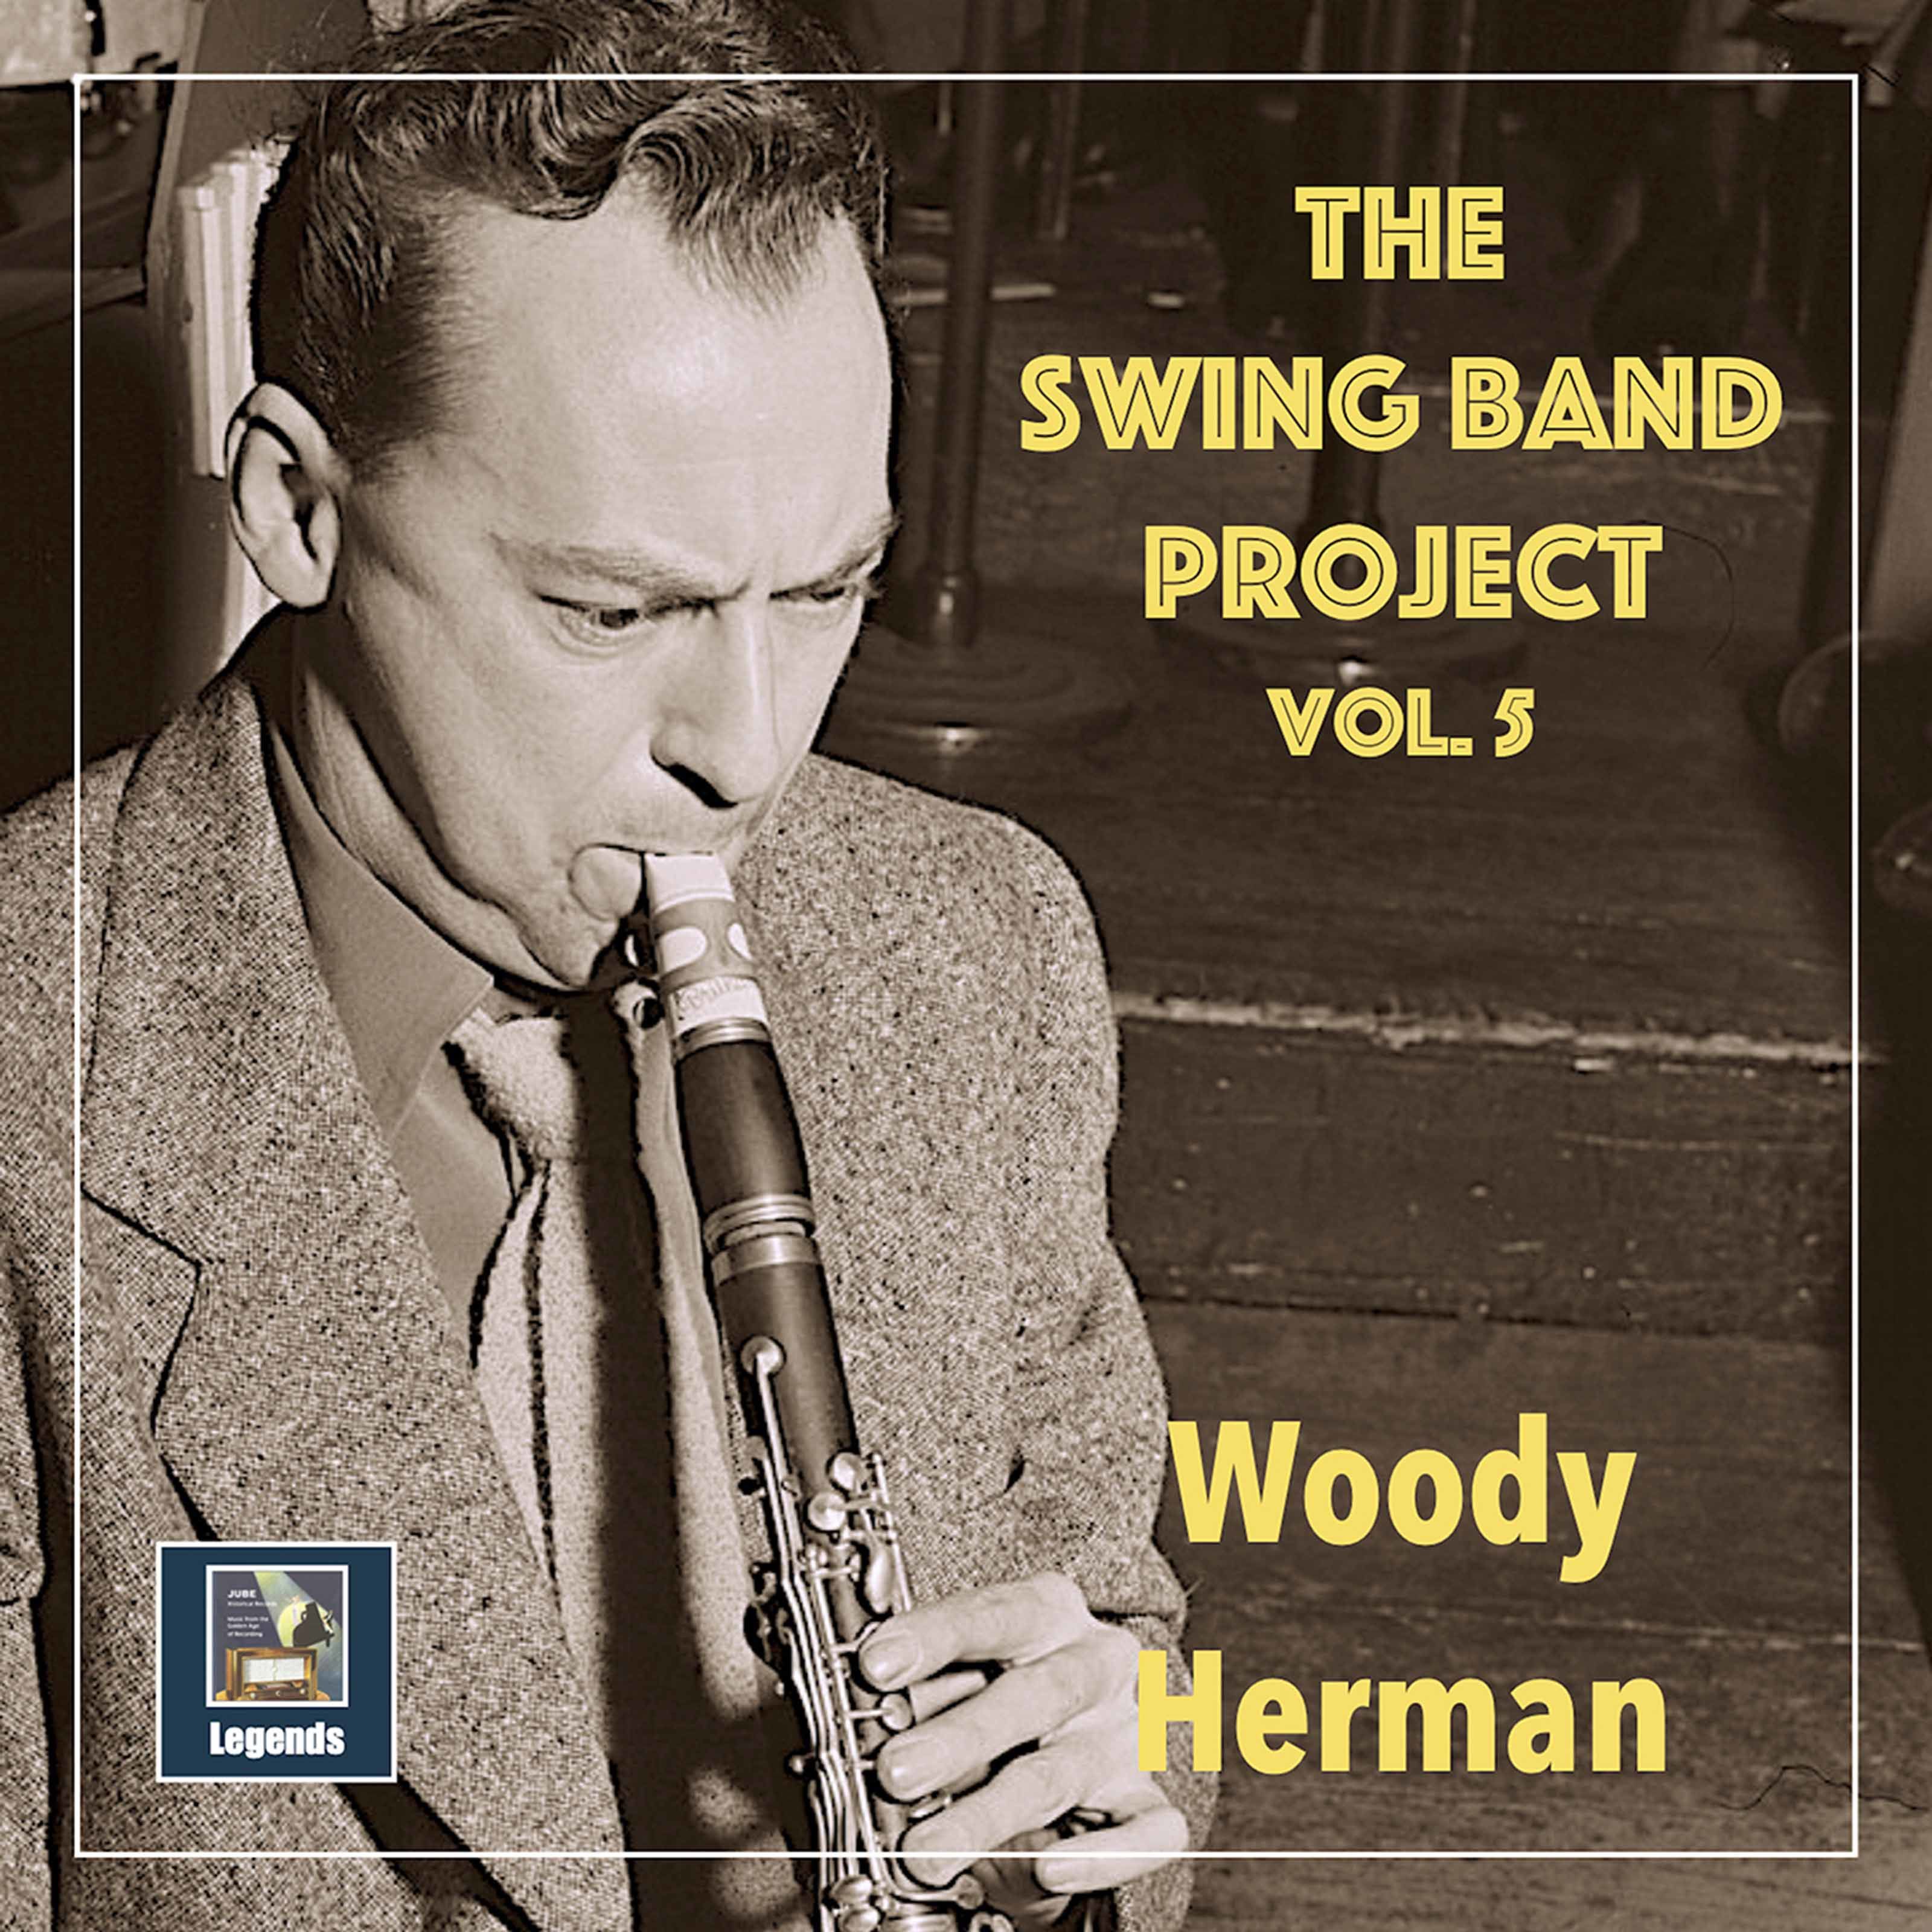 Woody Herman And His Orchestra - The Swing Band Project, Vol. 5 Woody Herman (2020) [FLAC 24bit/48kHz]